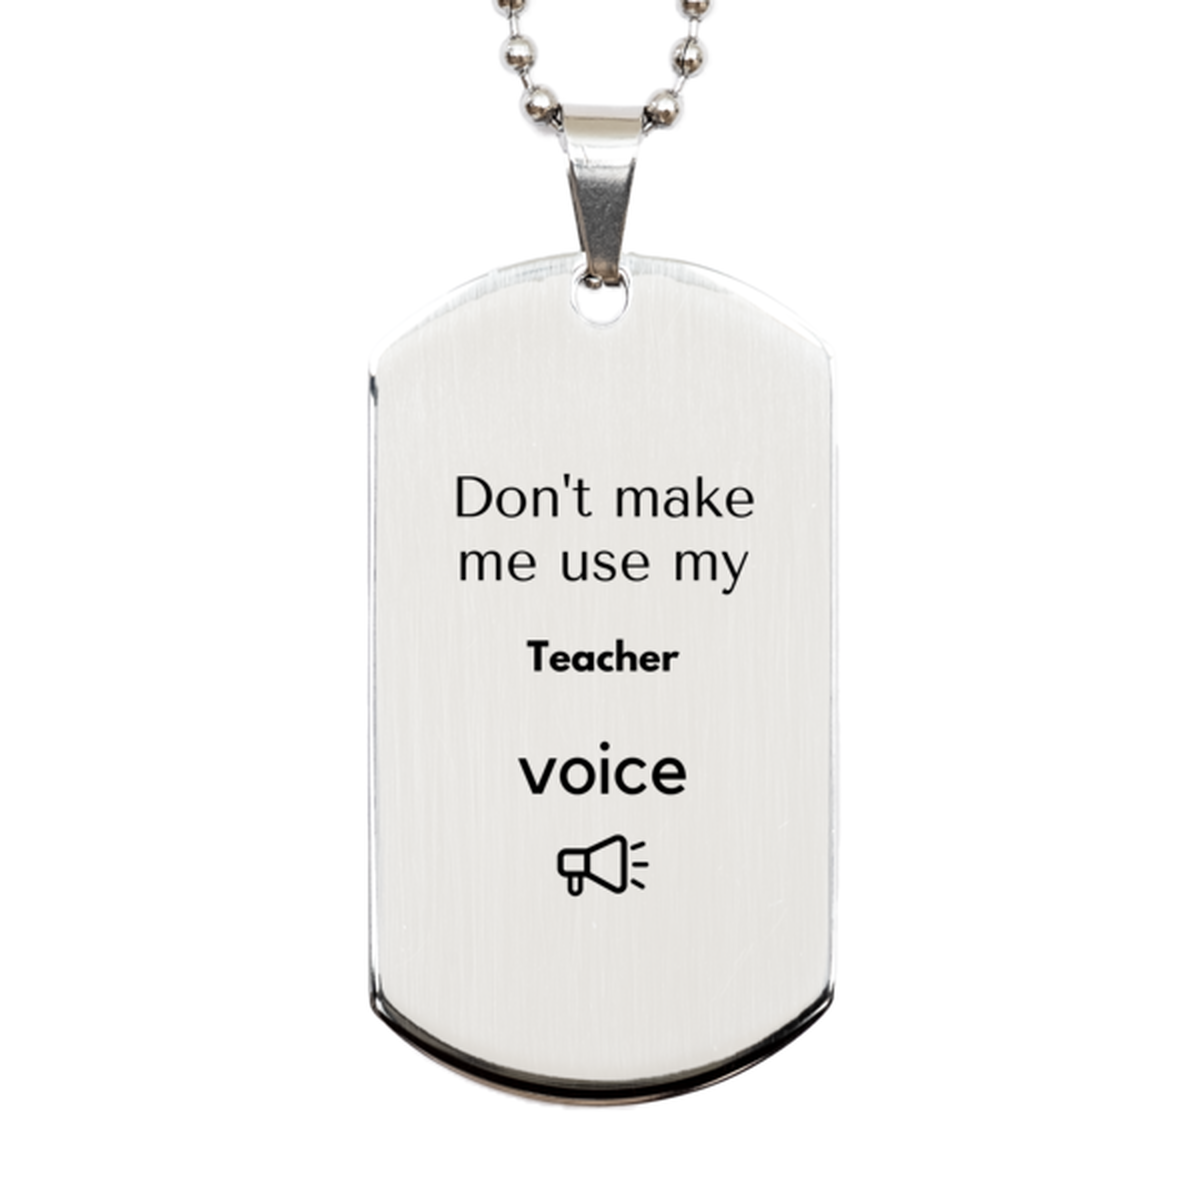 Don't make me use my Teacher voice, Sarcasm Teacher Gifts, Christmas Teacher Silver Dog Tag Birthday Unique Gifts For Teacher Coworkers, Men, Women, Colleague, Friends